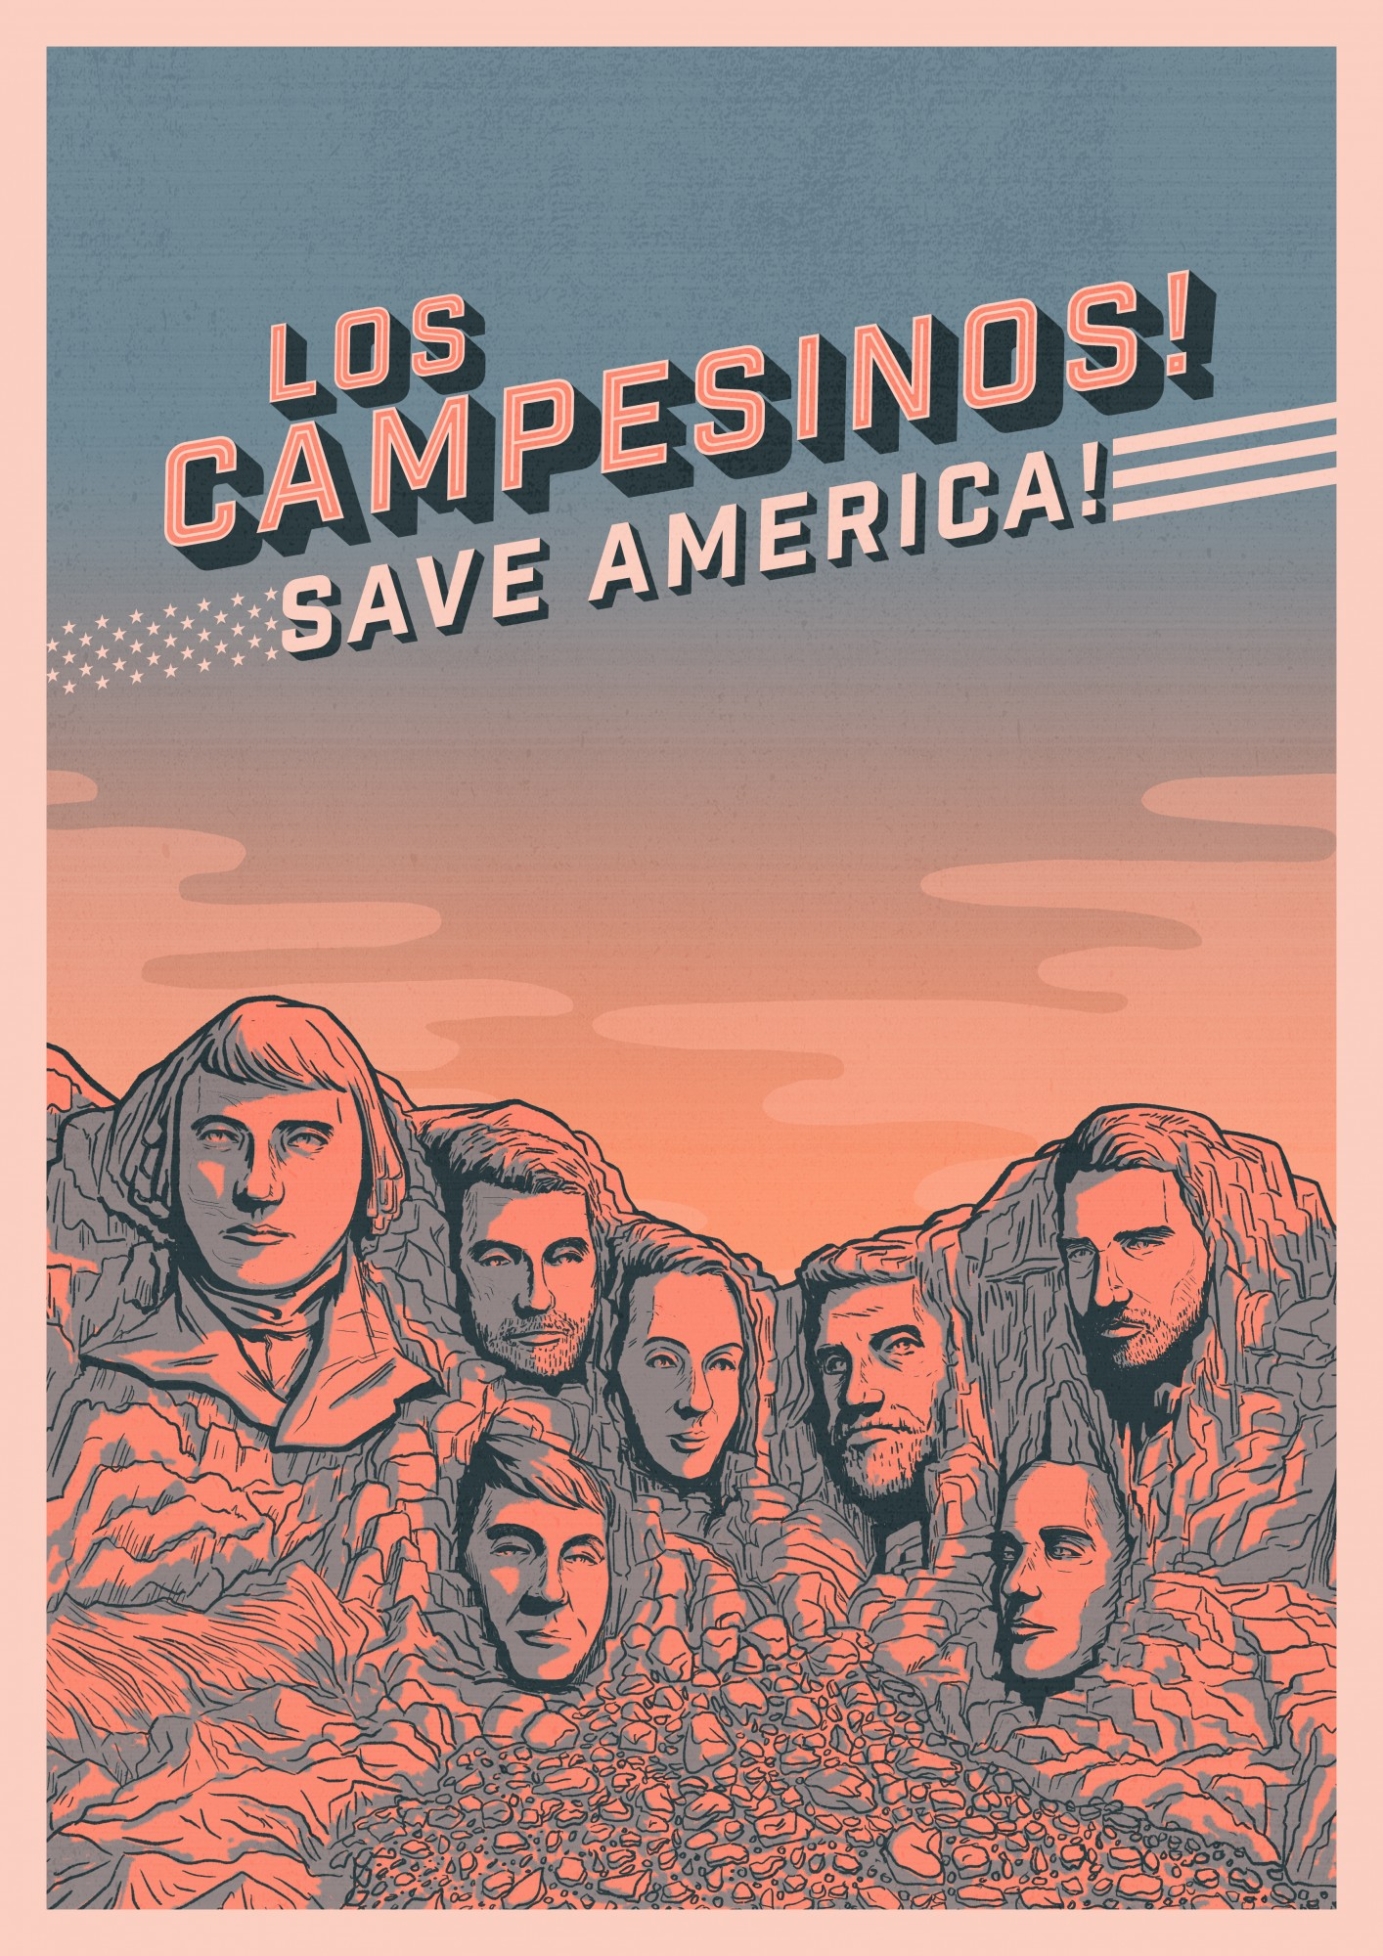 Artwork for Los Campesinos! by R-Corp